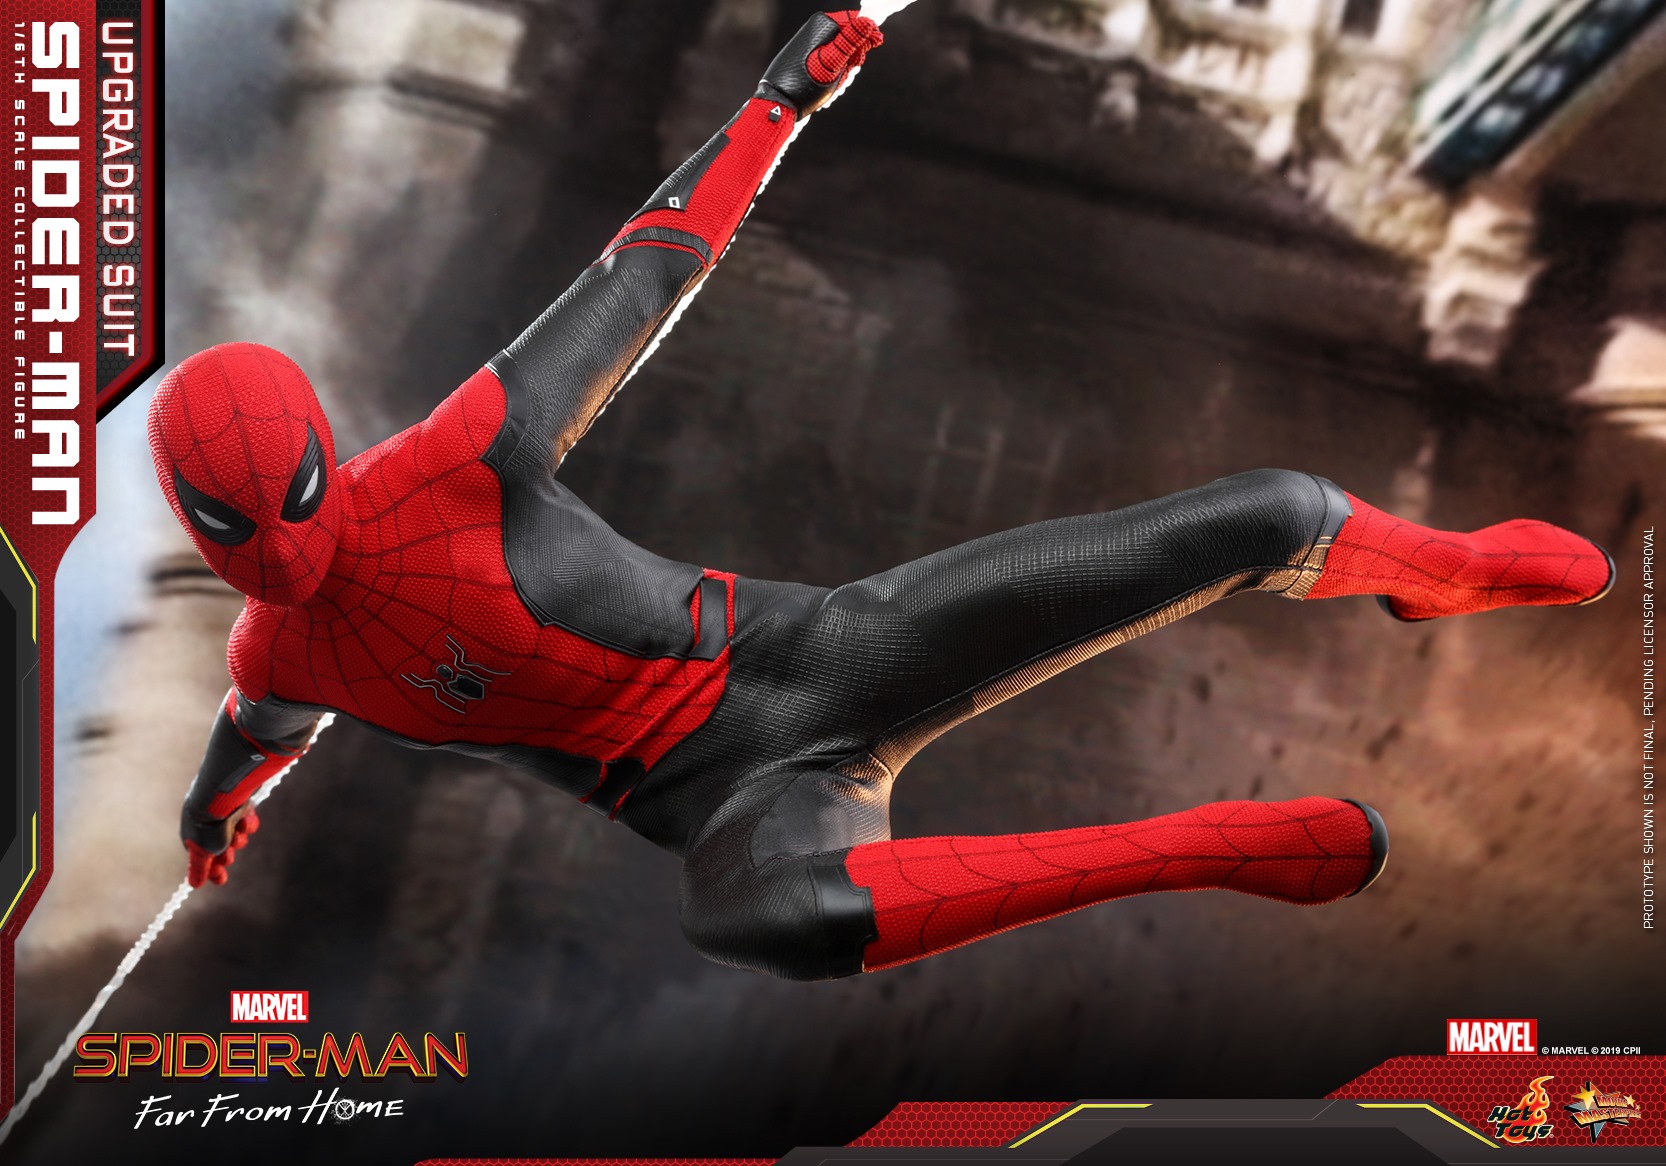 Hot Toys Reveals Spider-Man's New Black and Red Suit Action Figure From